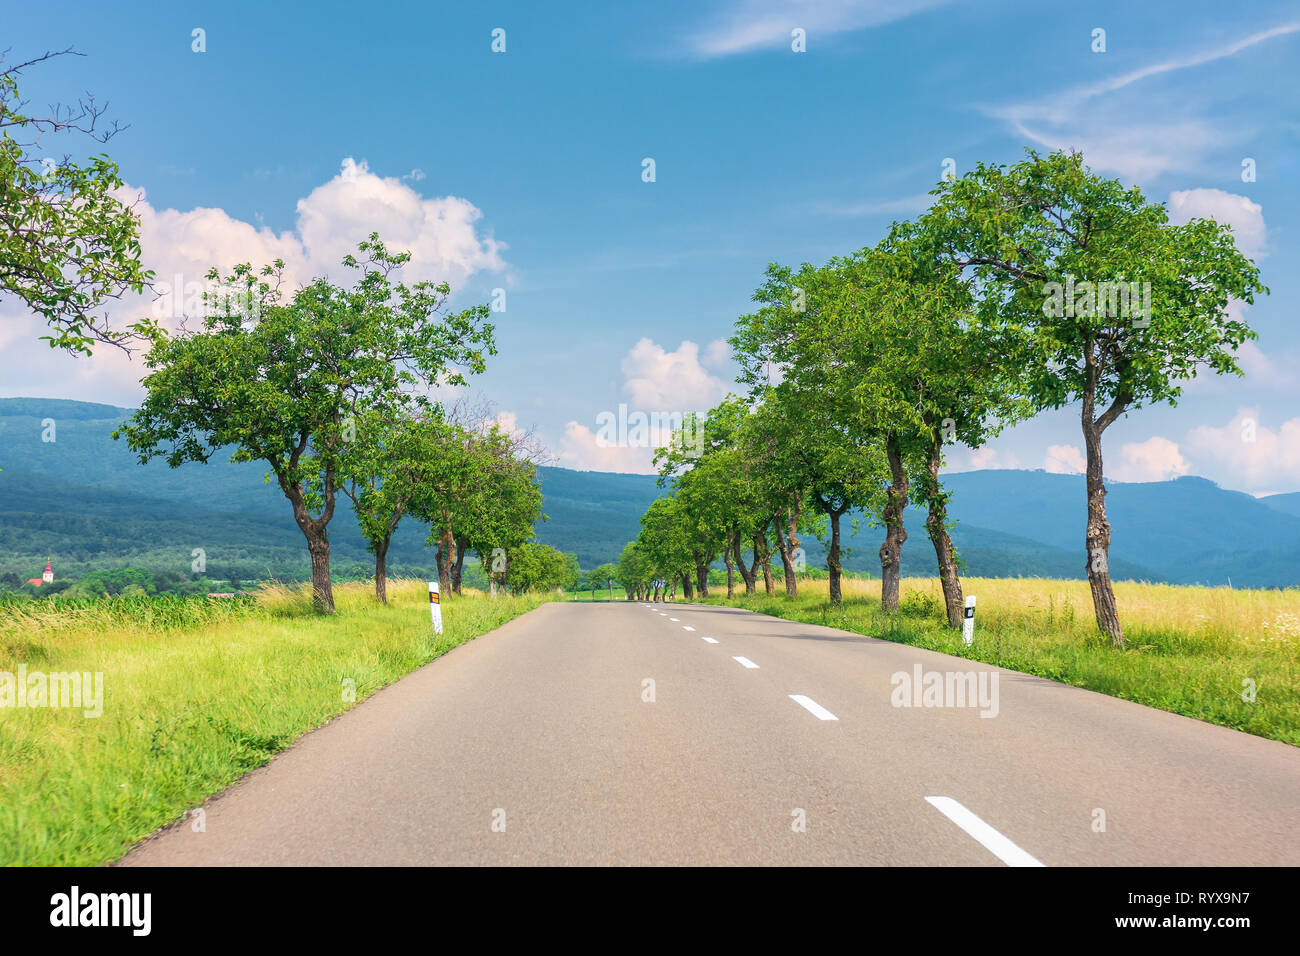 countryside road in to the mountains. trees and rural fields on both sides along the straight way. wonderful sunny weather with fluffy clouds on a blu Stock Photo